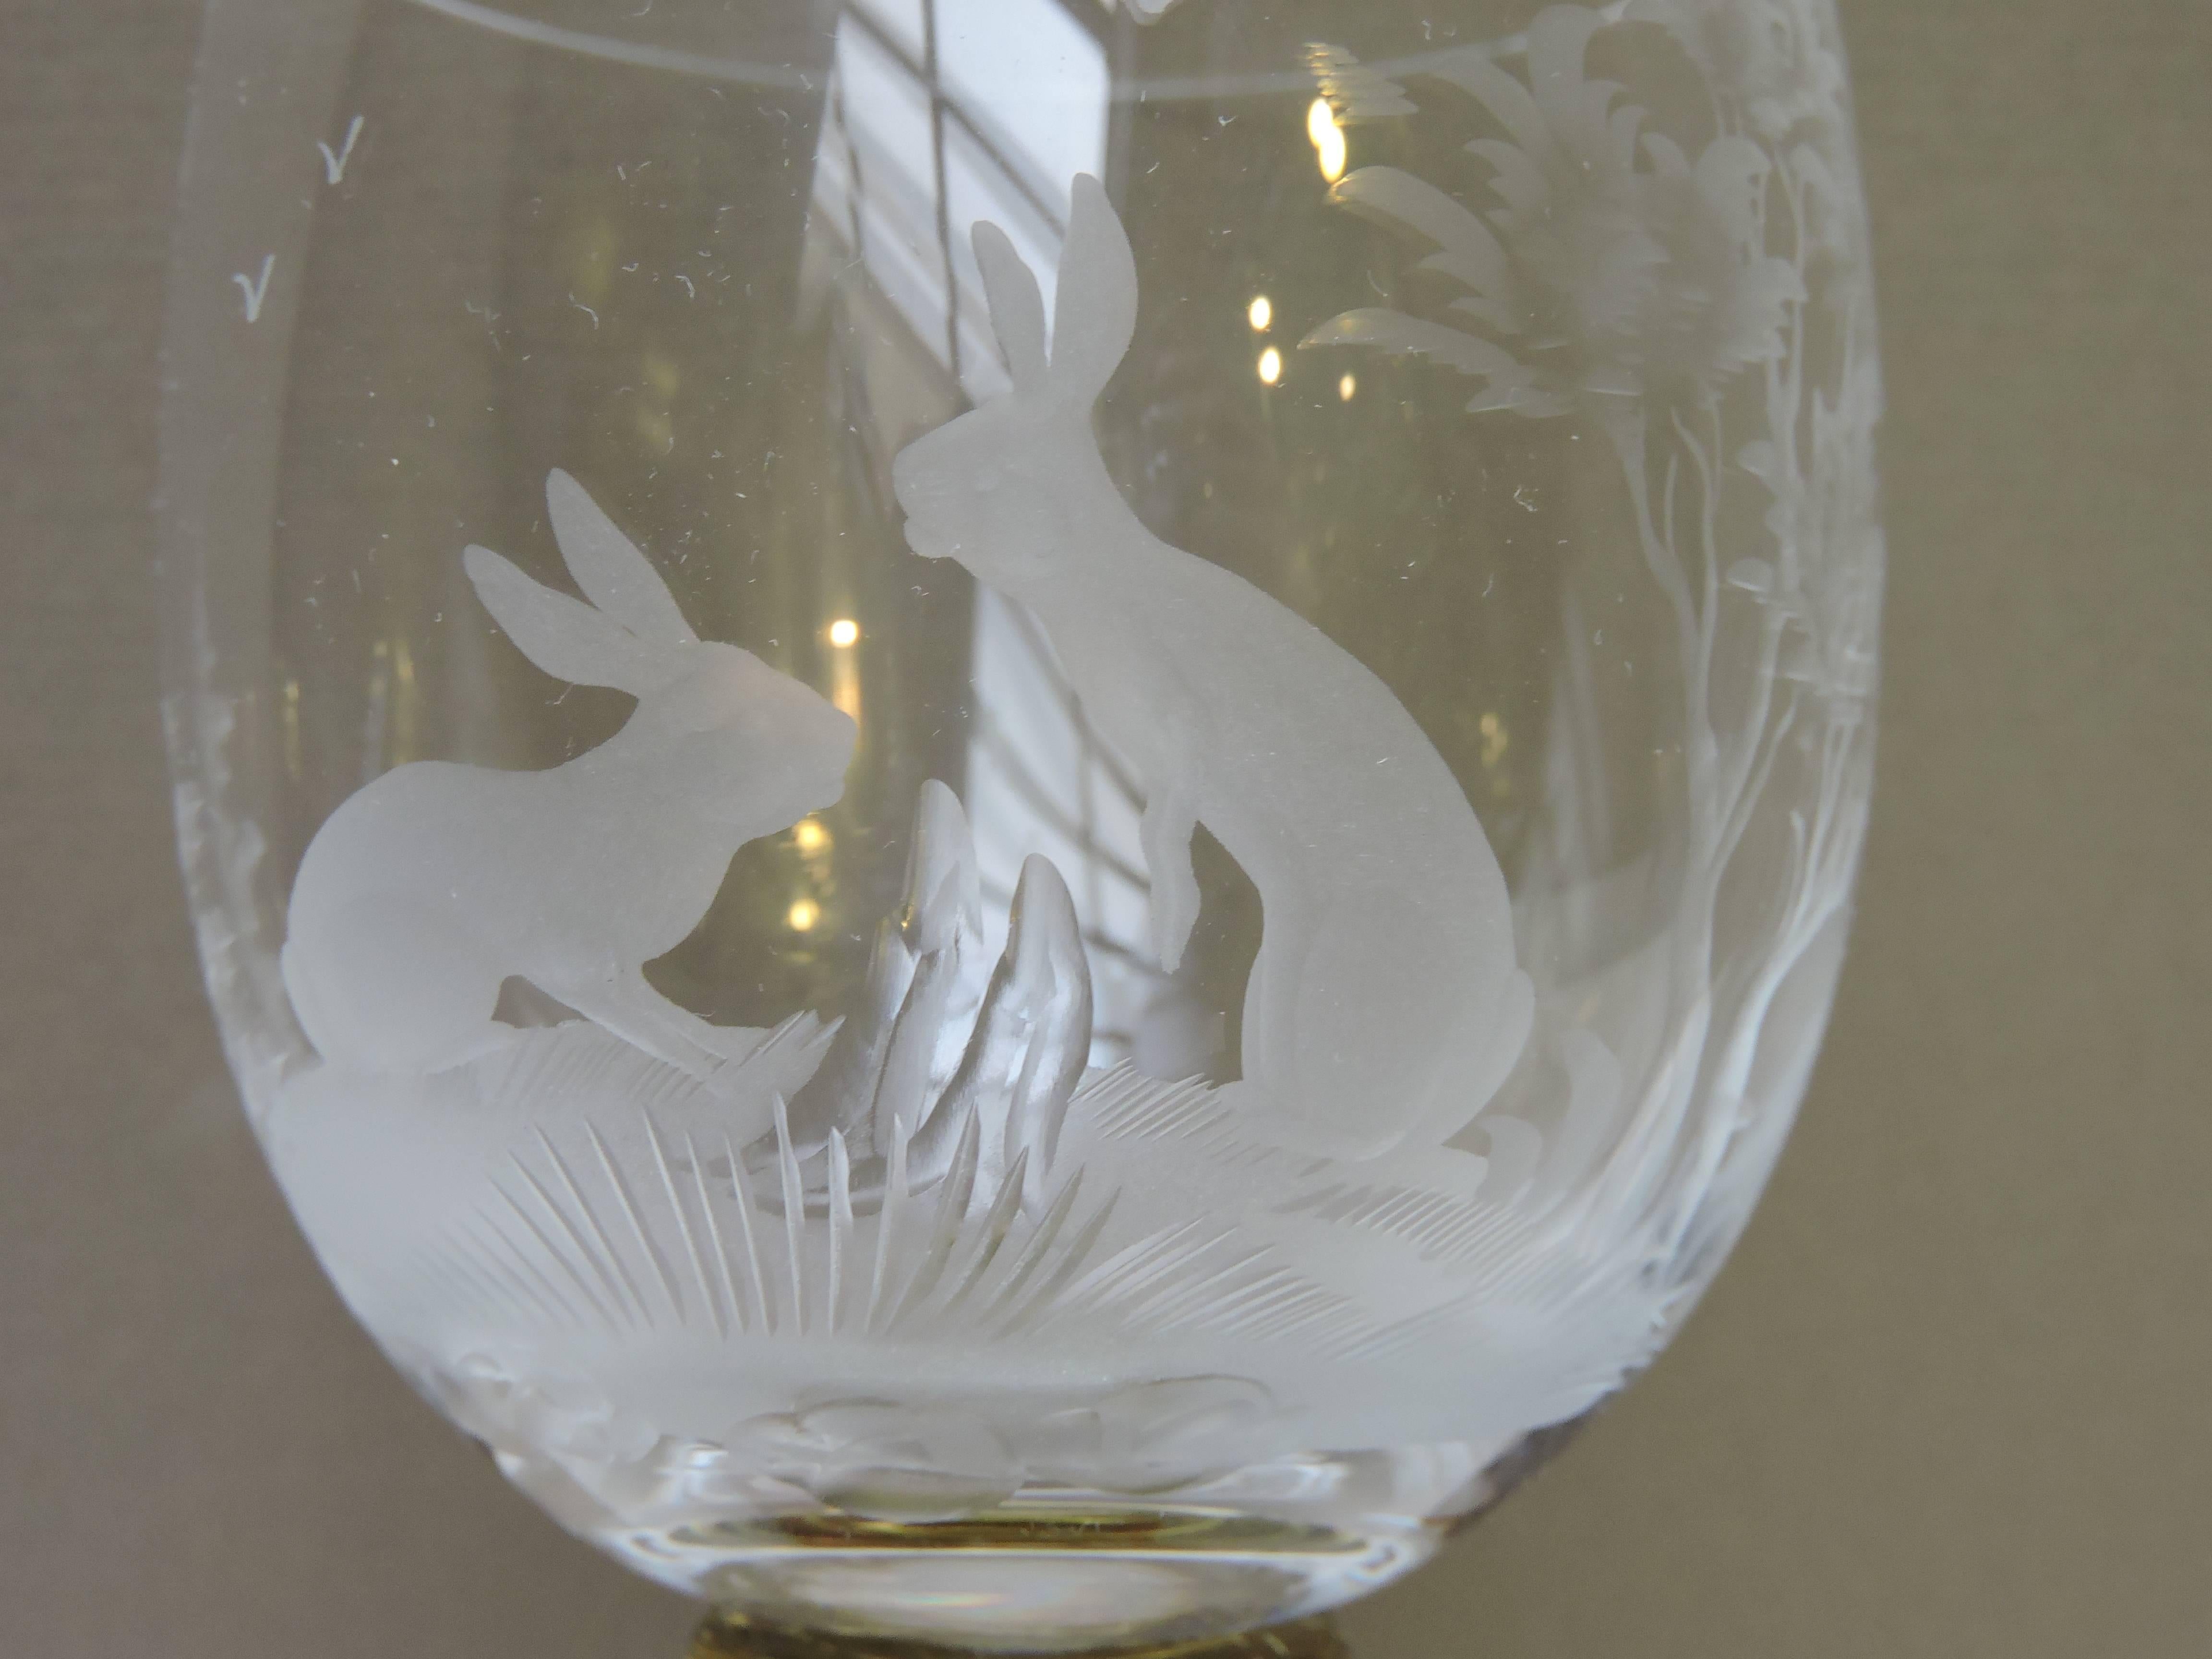 theresienthal glass mark